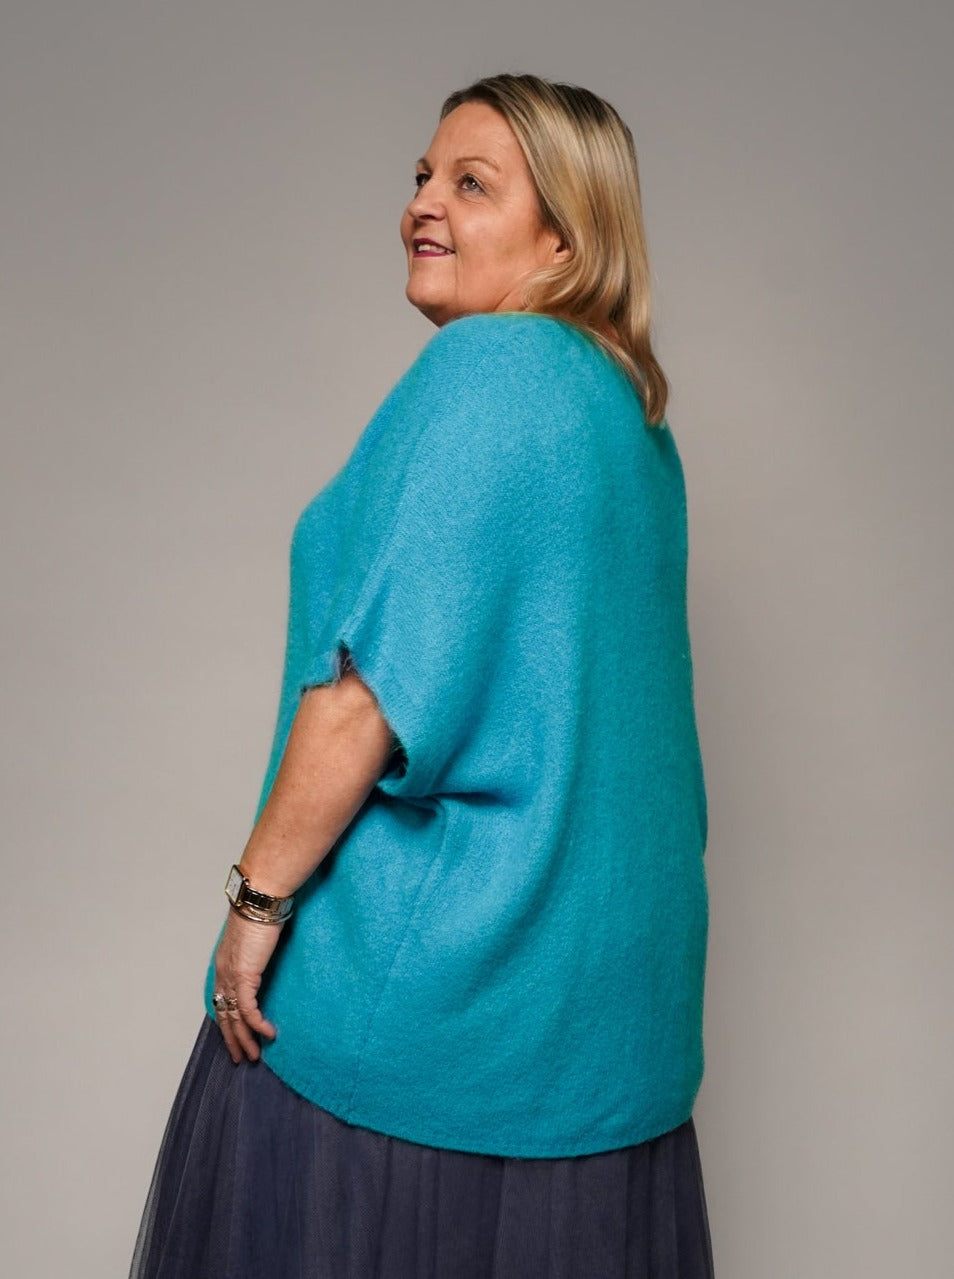 Pull sans manches turquoise - 1851